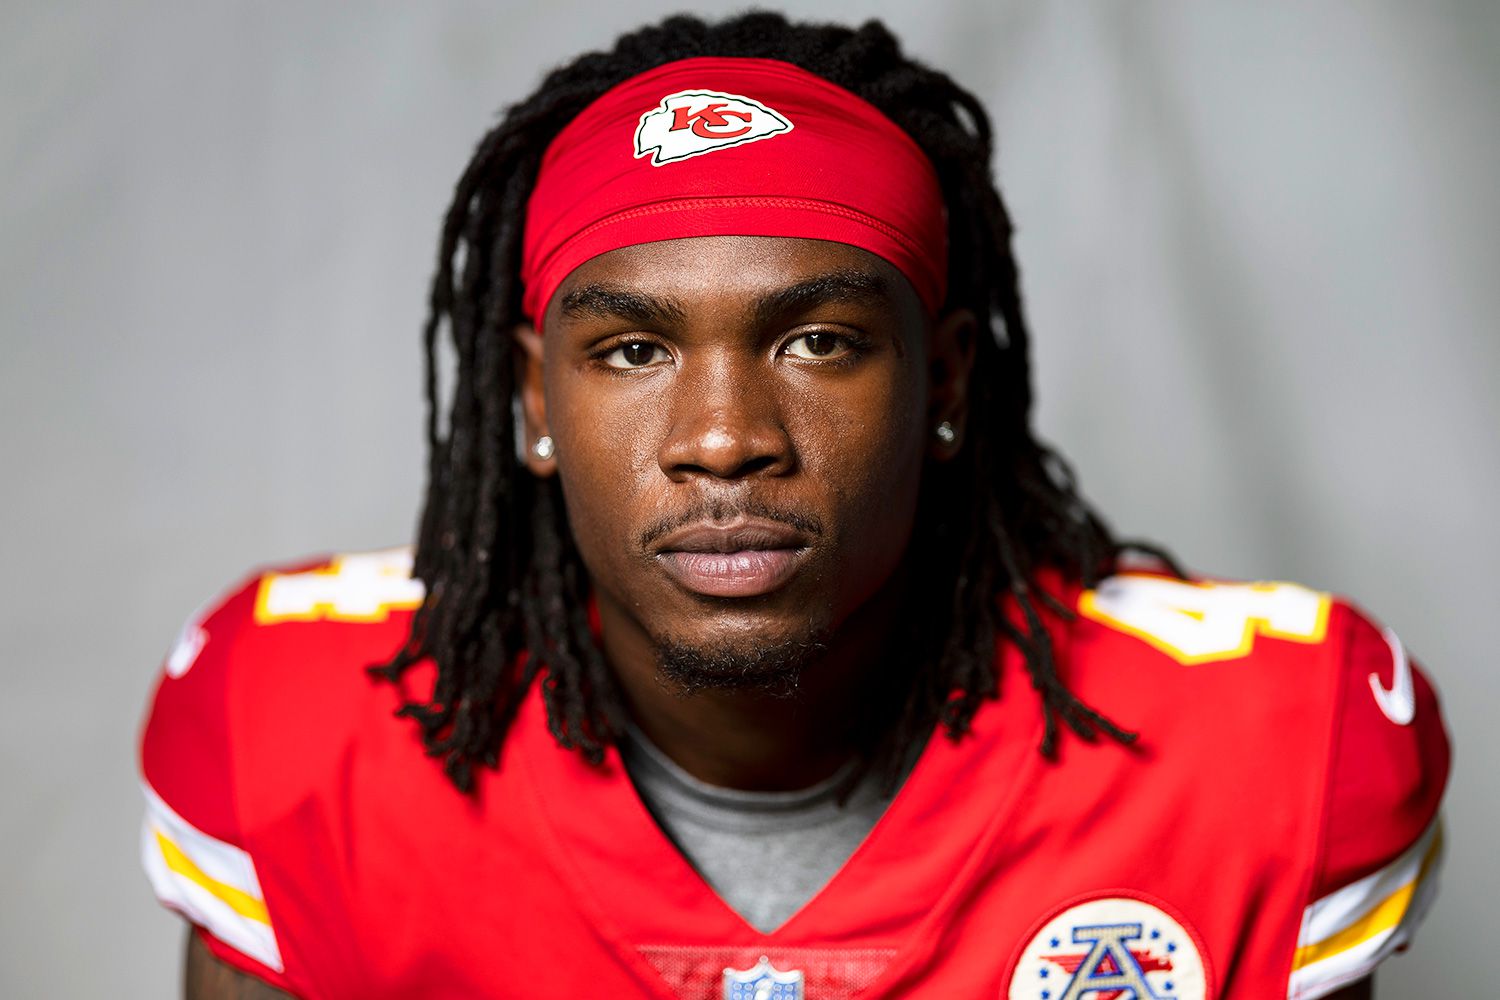  Chiefs' Receiver Rashee Rice Faces Legal Hurdles After Traffic Incident What This Means for His Future in the NFL---